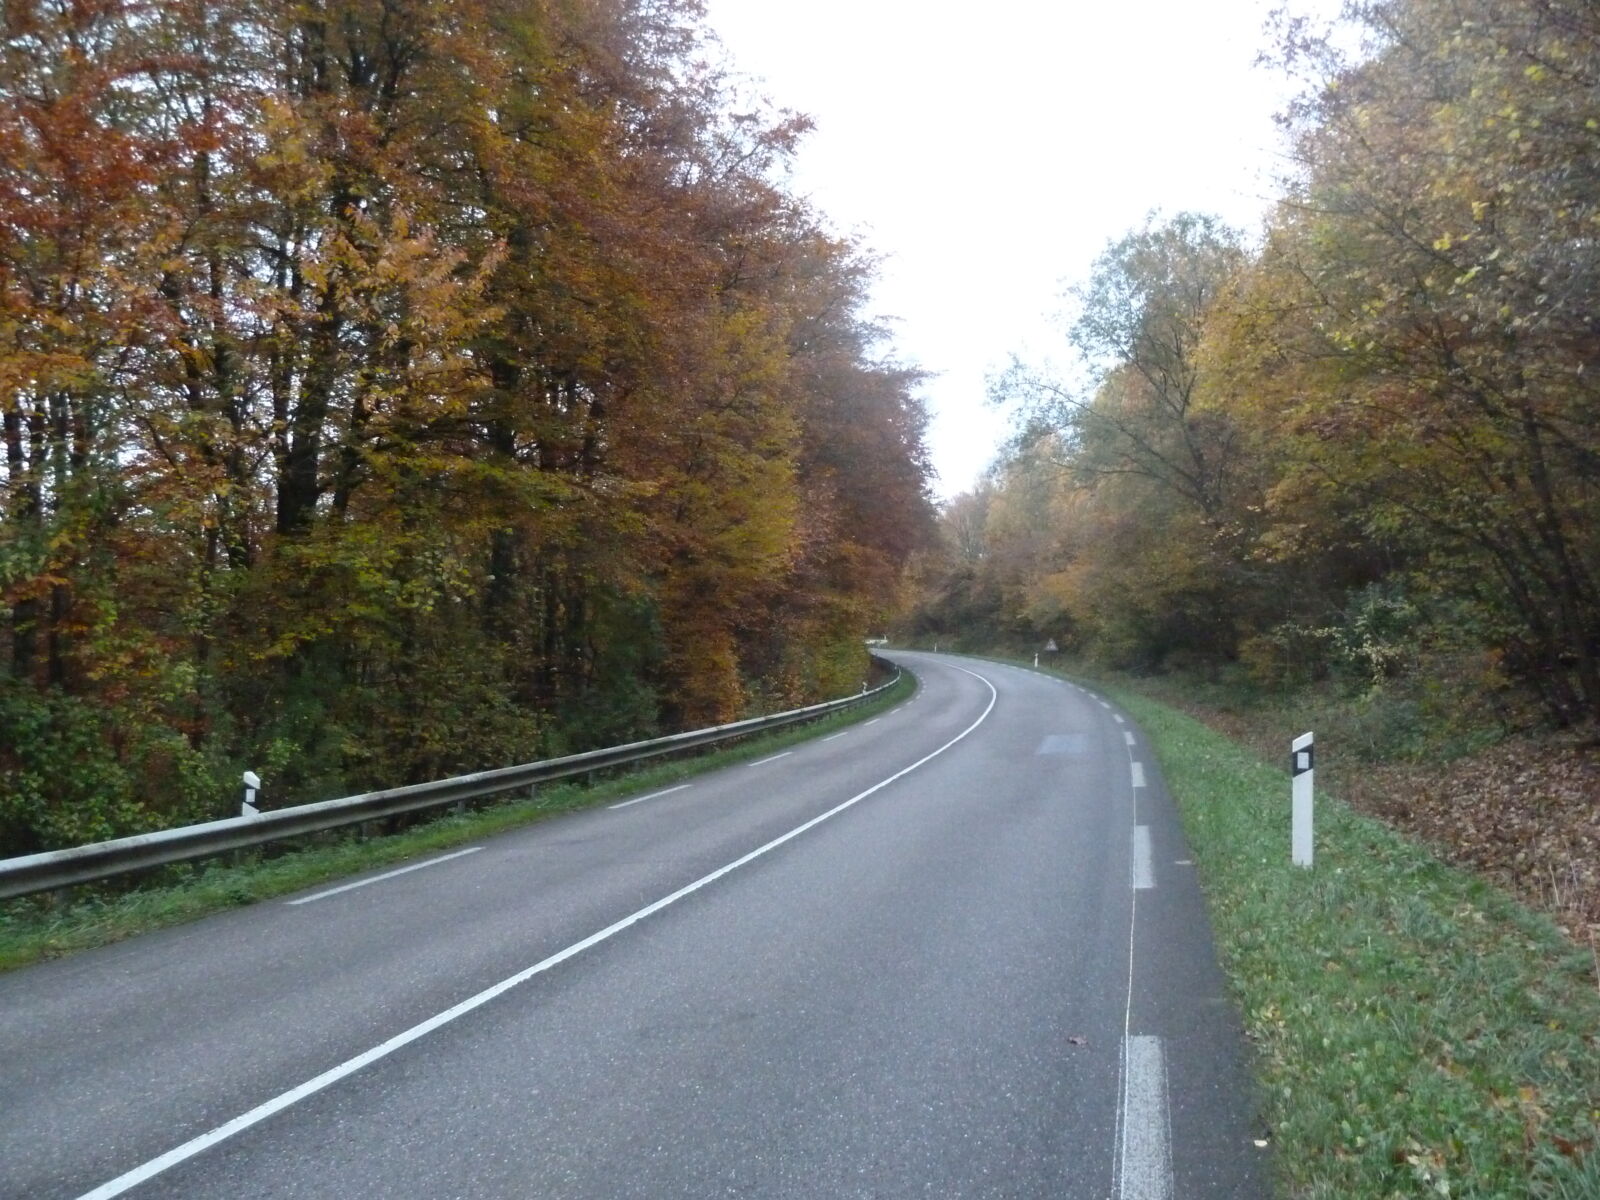 A road with trees in the background